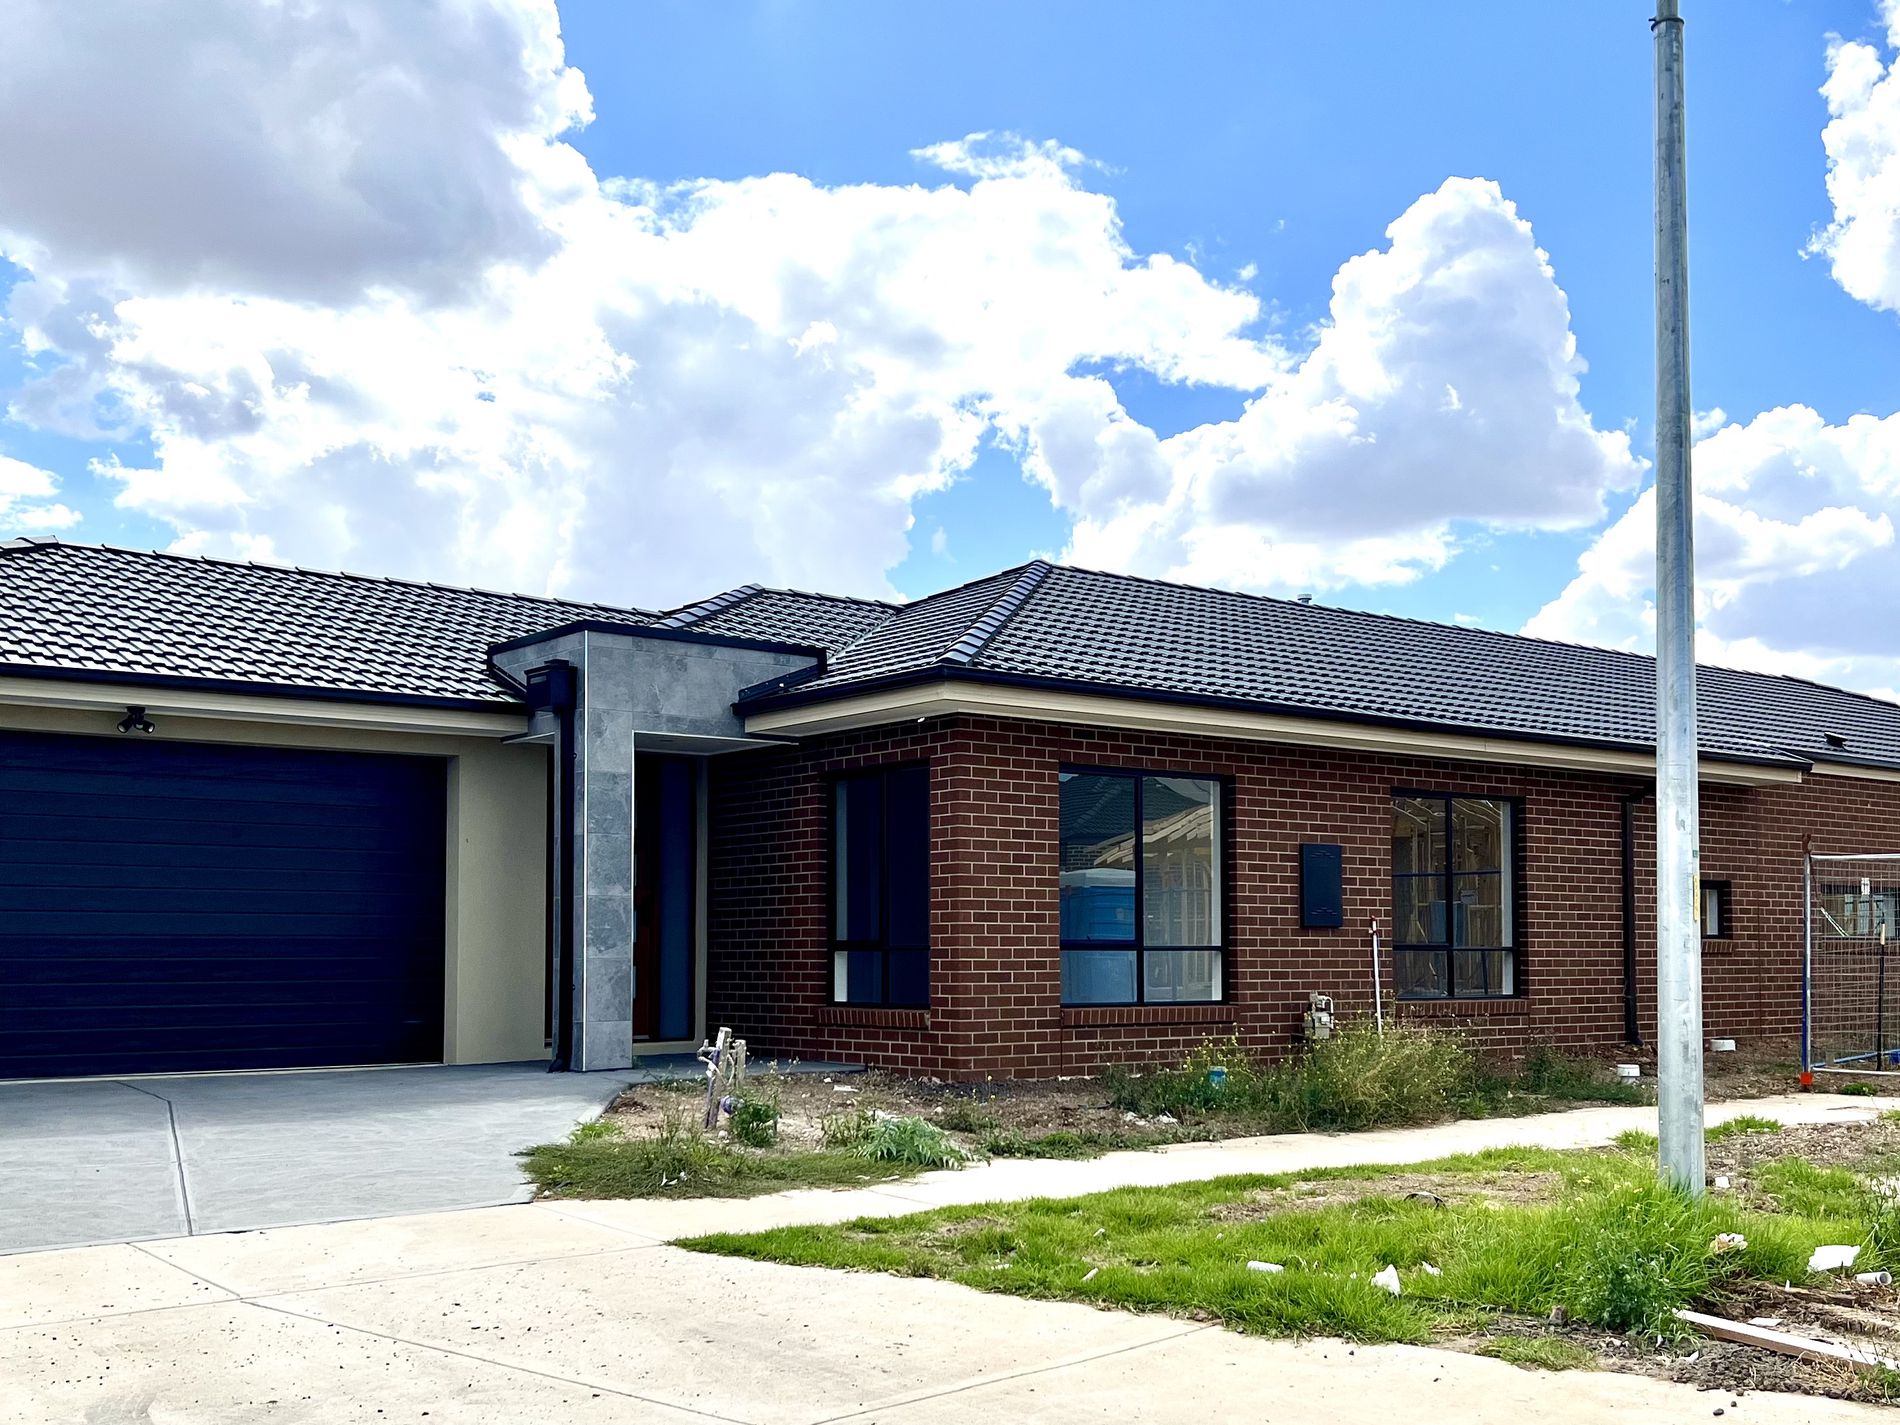 14 Sumpter Court Wyndham Vale Equity Wise Real Estate